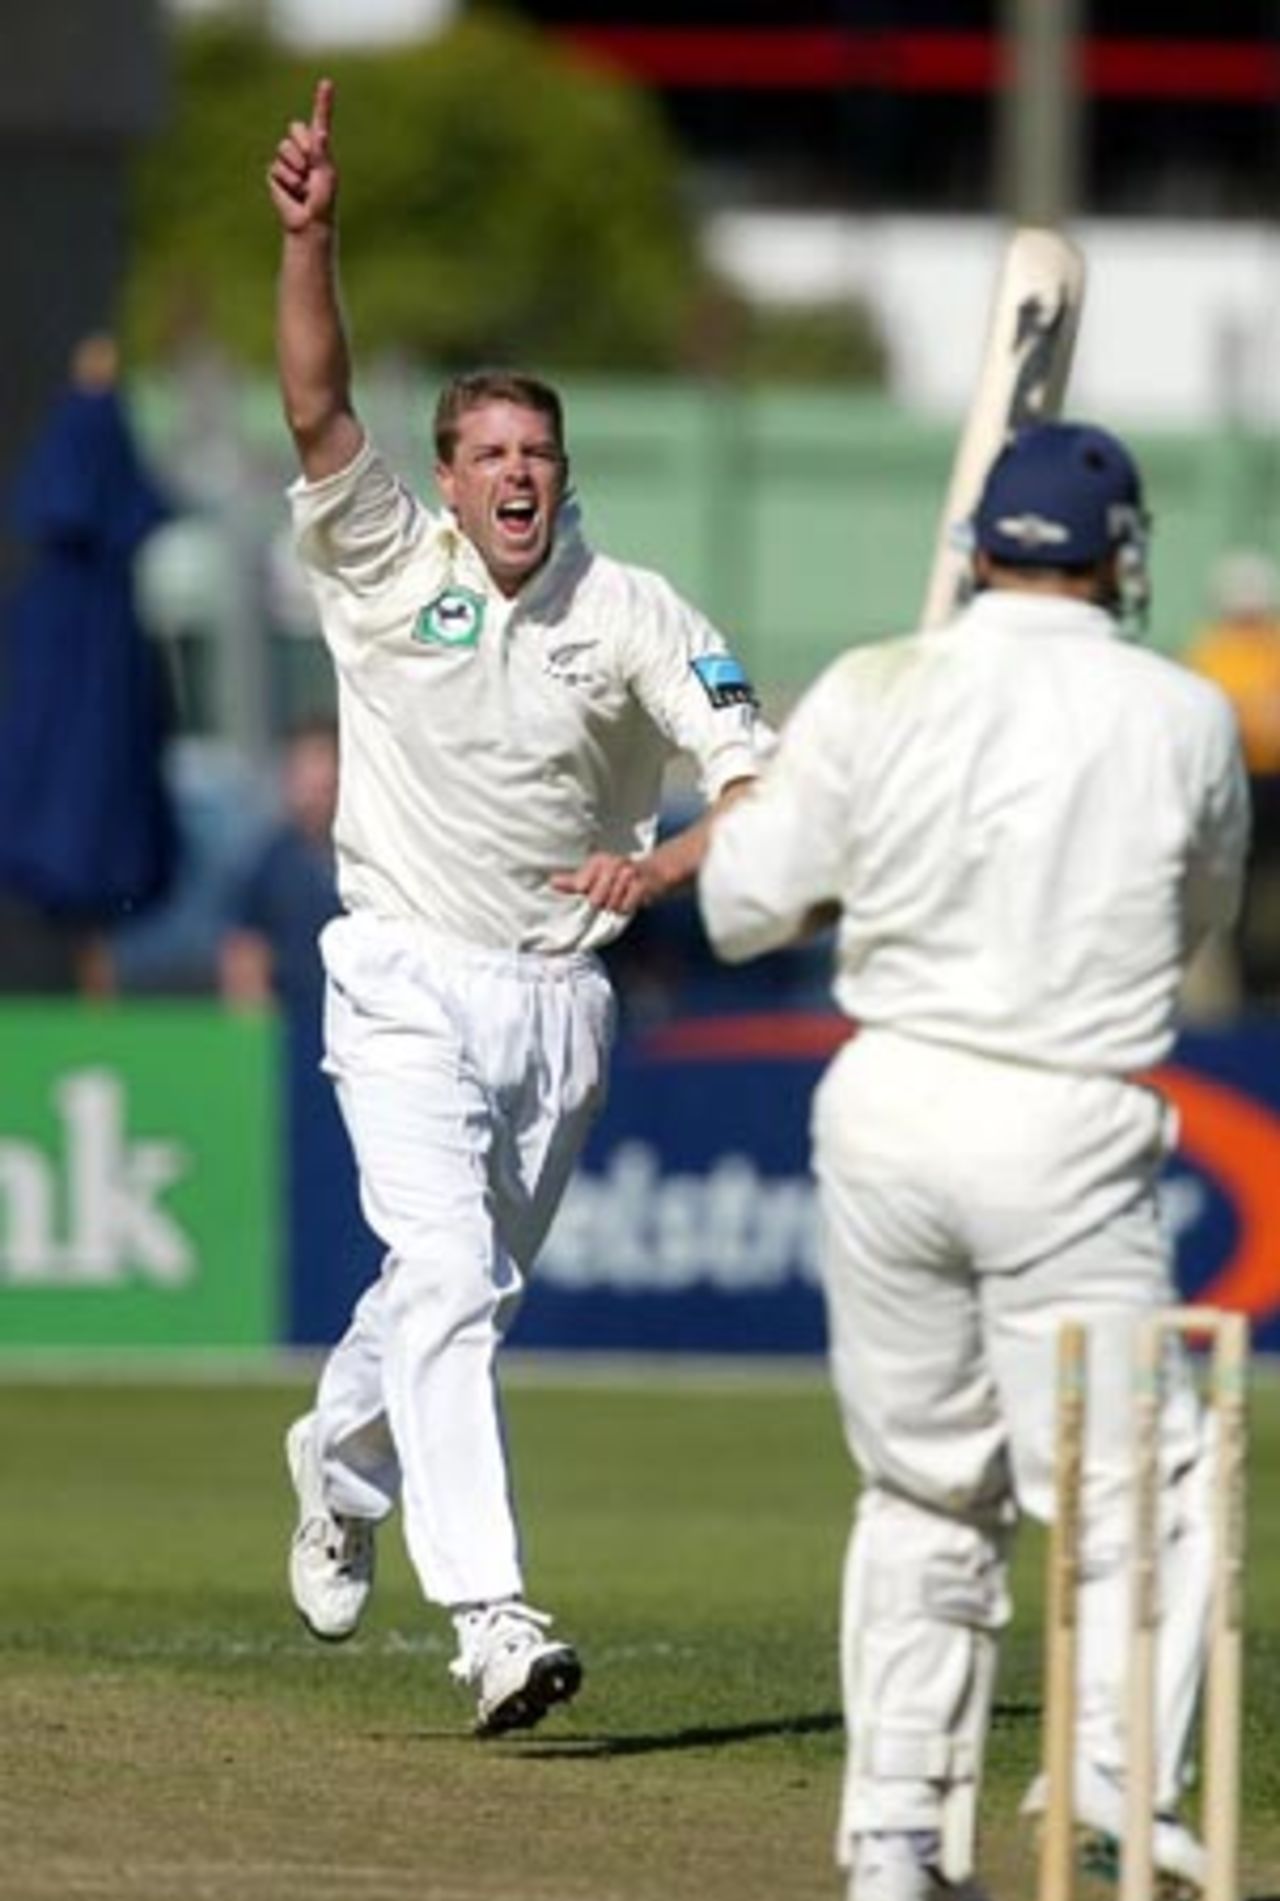 New Zealand bowler Chris Drum celebrates the dismissal of England batsman Mark Ramprakash, bowled in his second innings for 11. 1st Test: New Zealand v England at Jade Stadium, Christchurch, 13-17 March 2002 (15 March 2002).